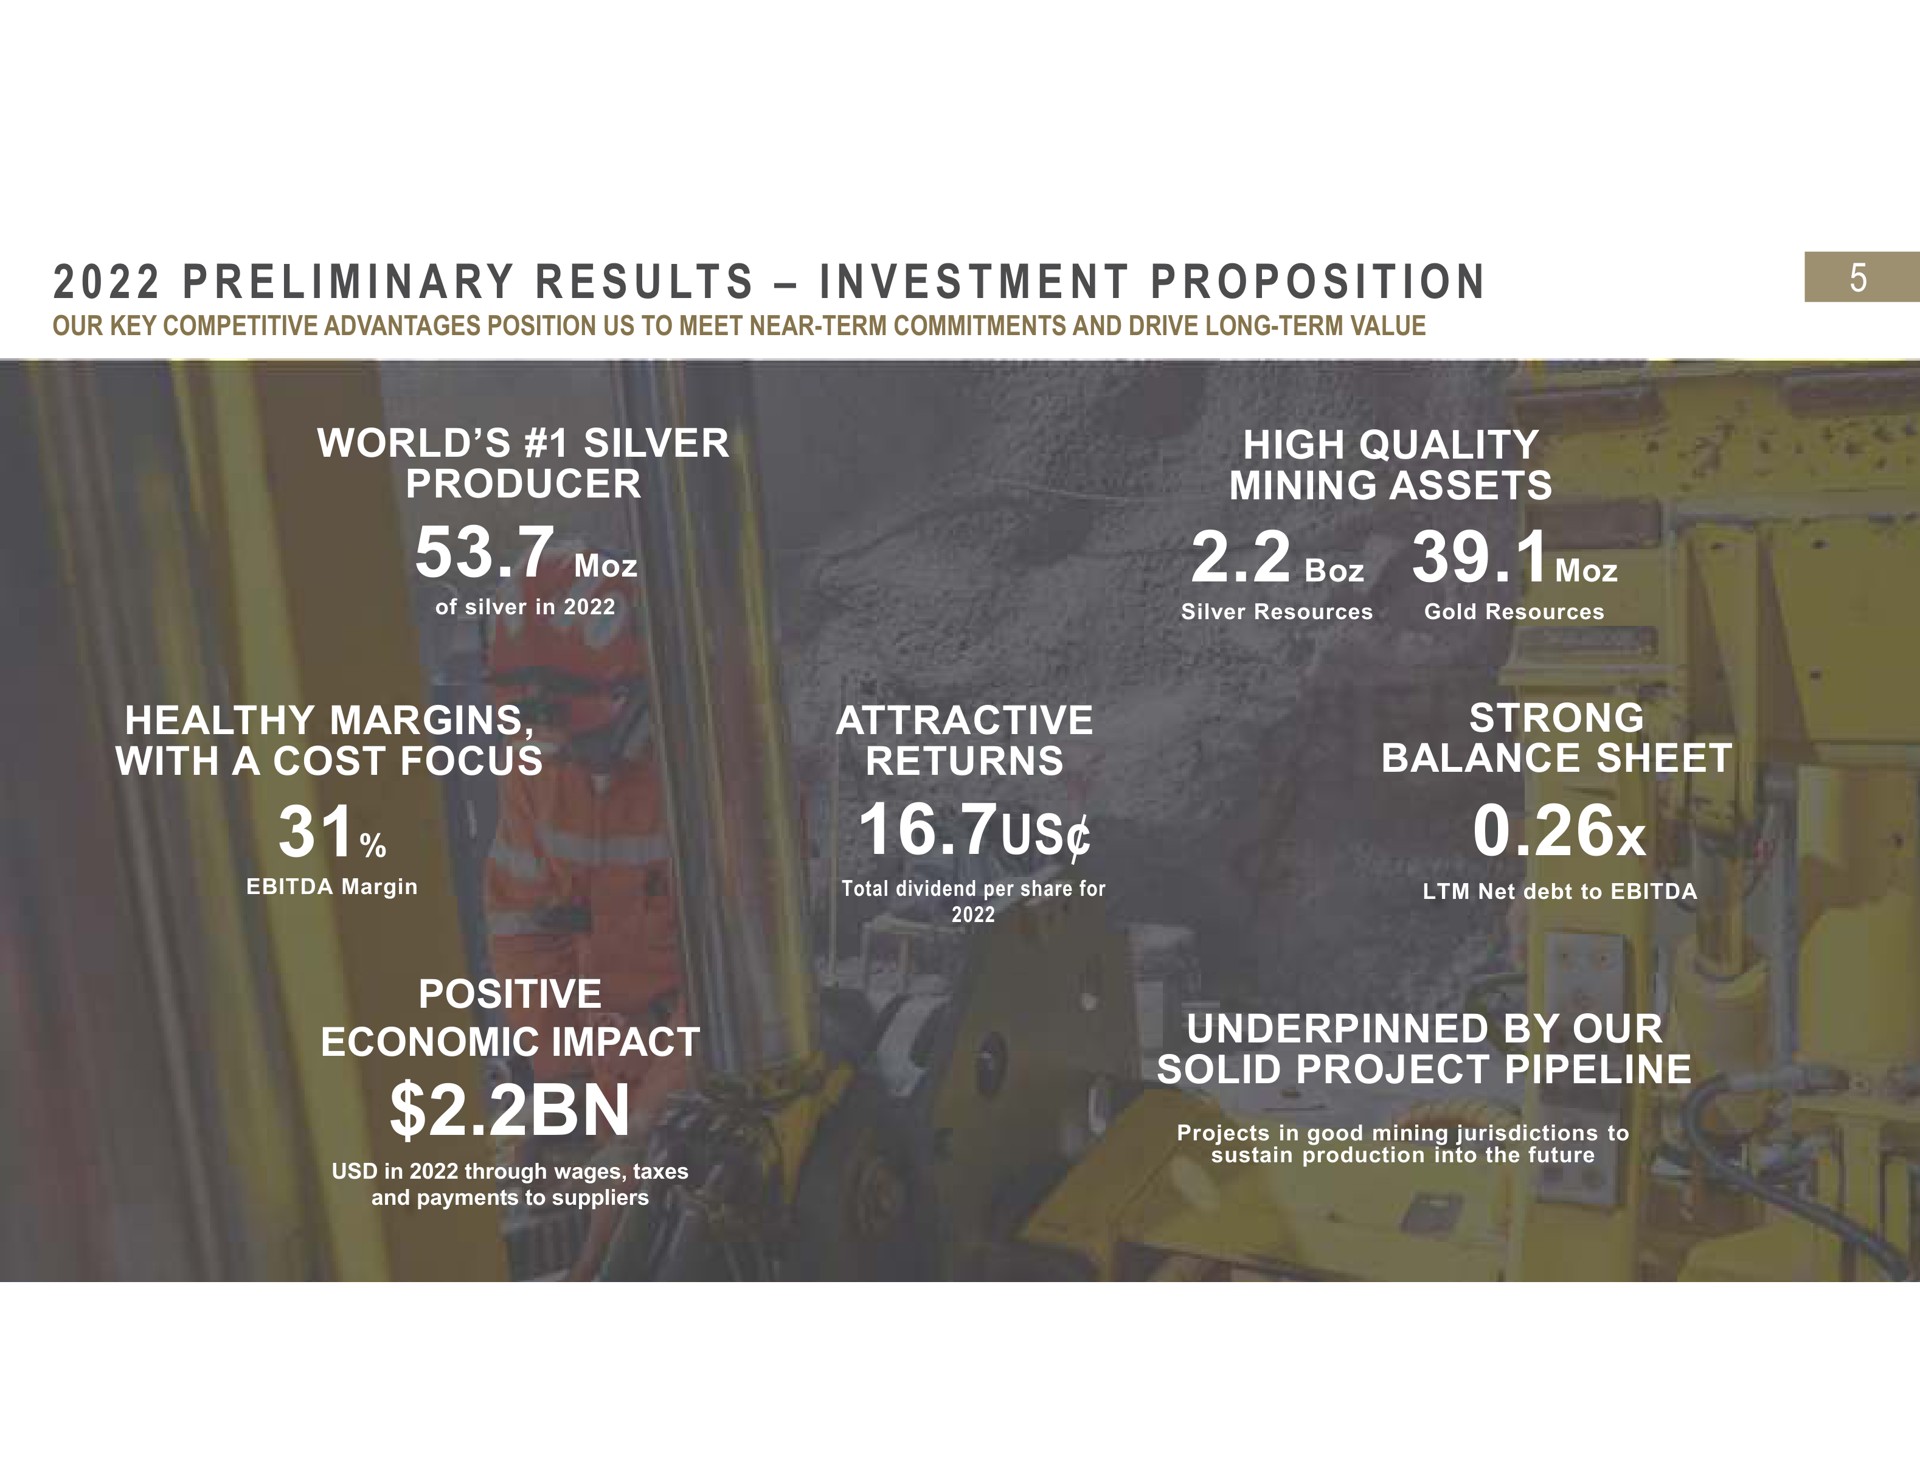 i i a i i i world silver producer high quality mining assets healthy margins with a cost focus attractive returns us strong balance sheet positive economic impact underpinned by our solid project pipeline preliminary results investment proposition | Fresnillo